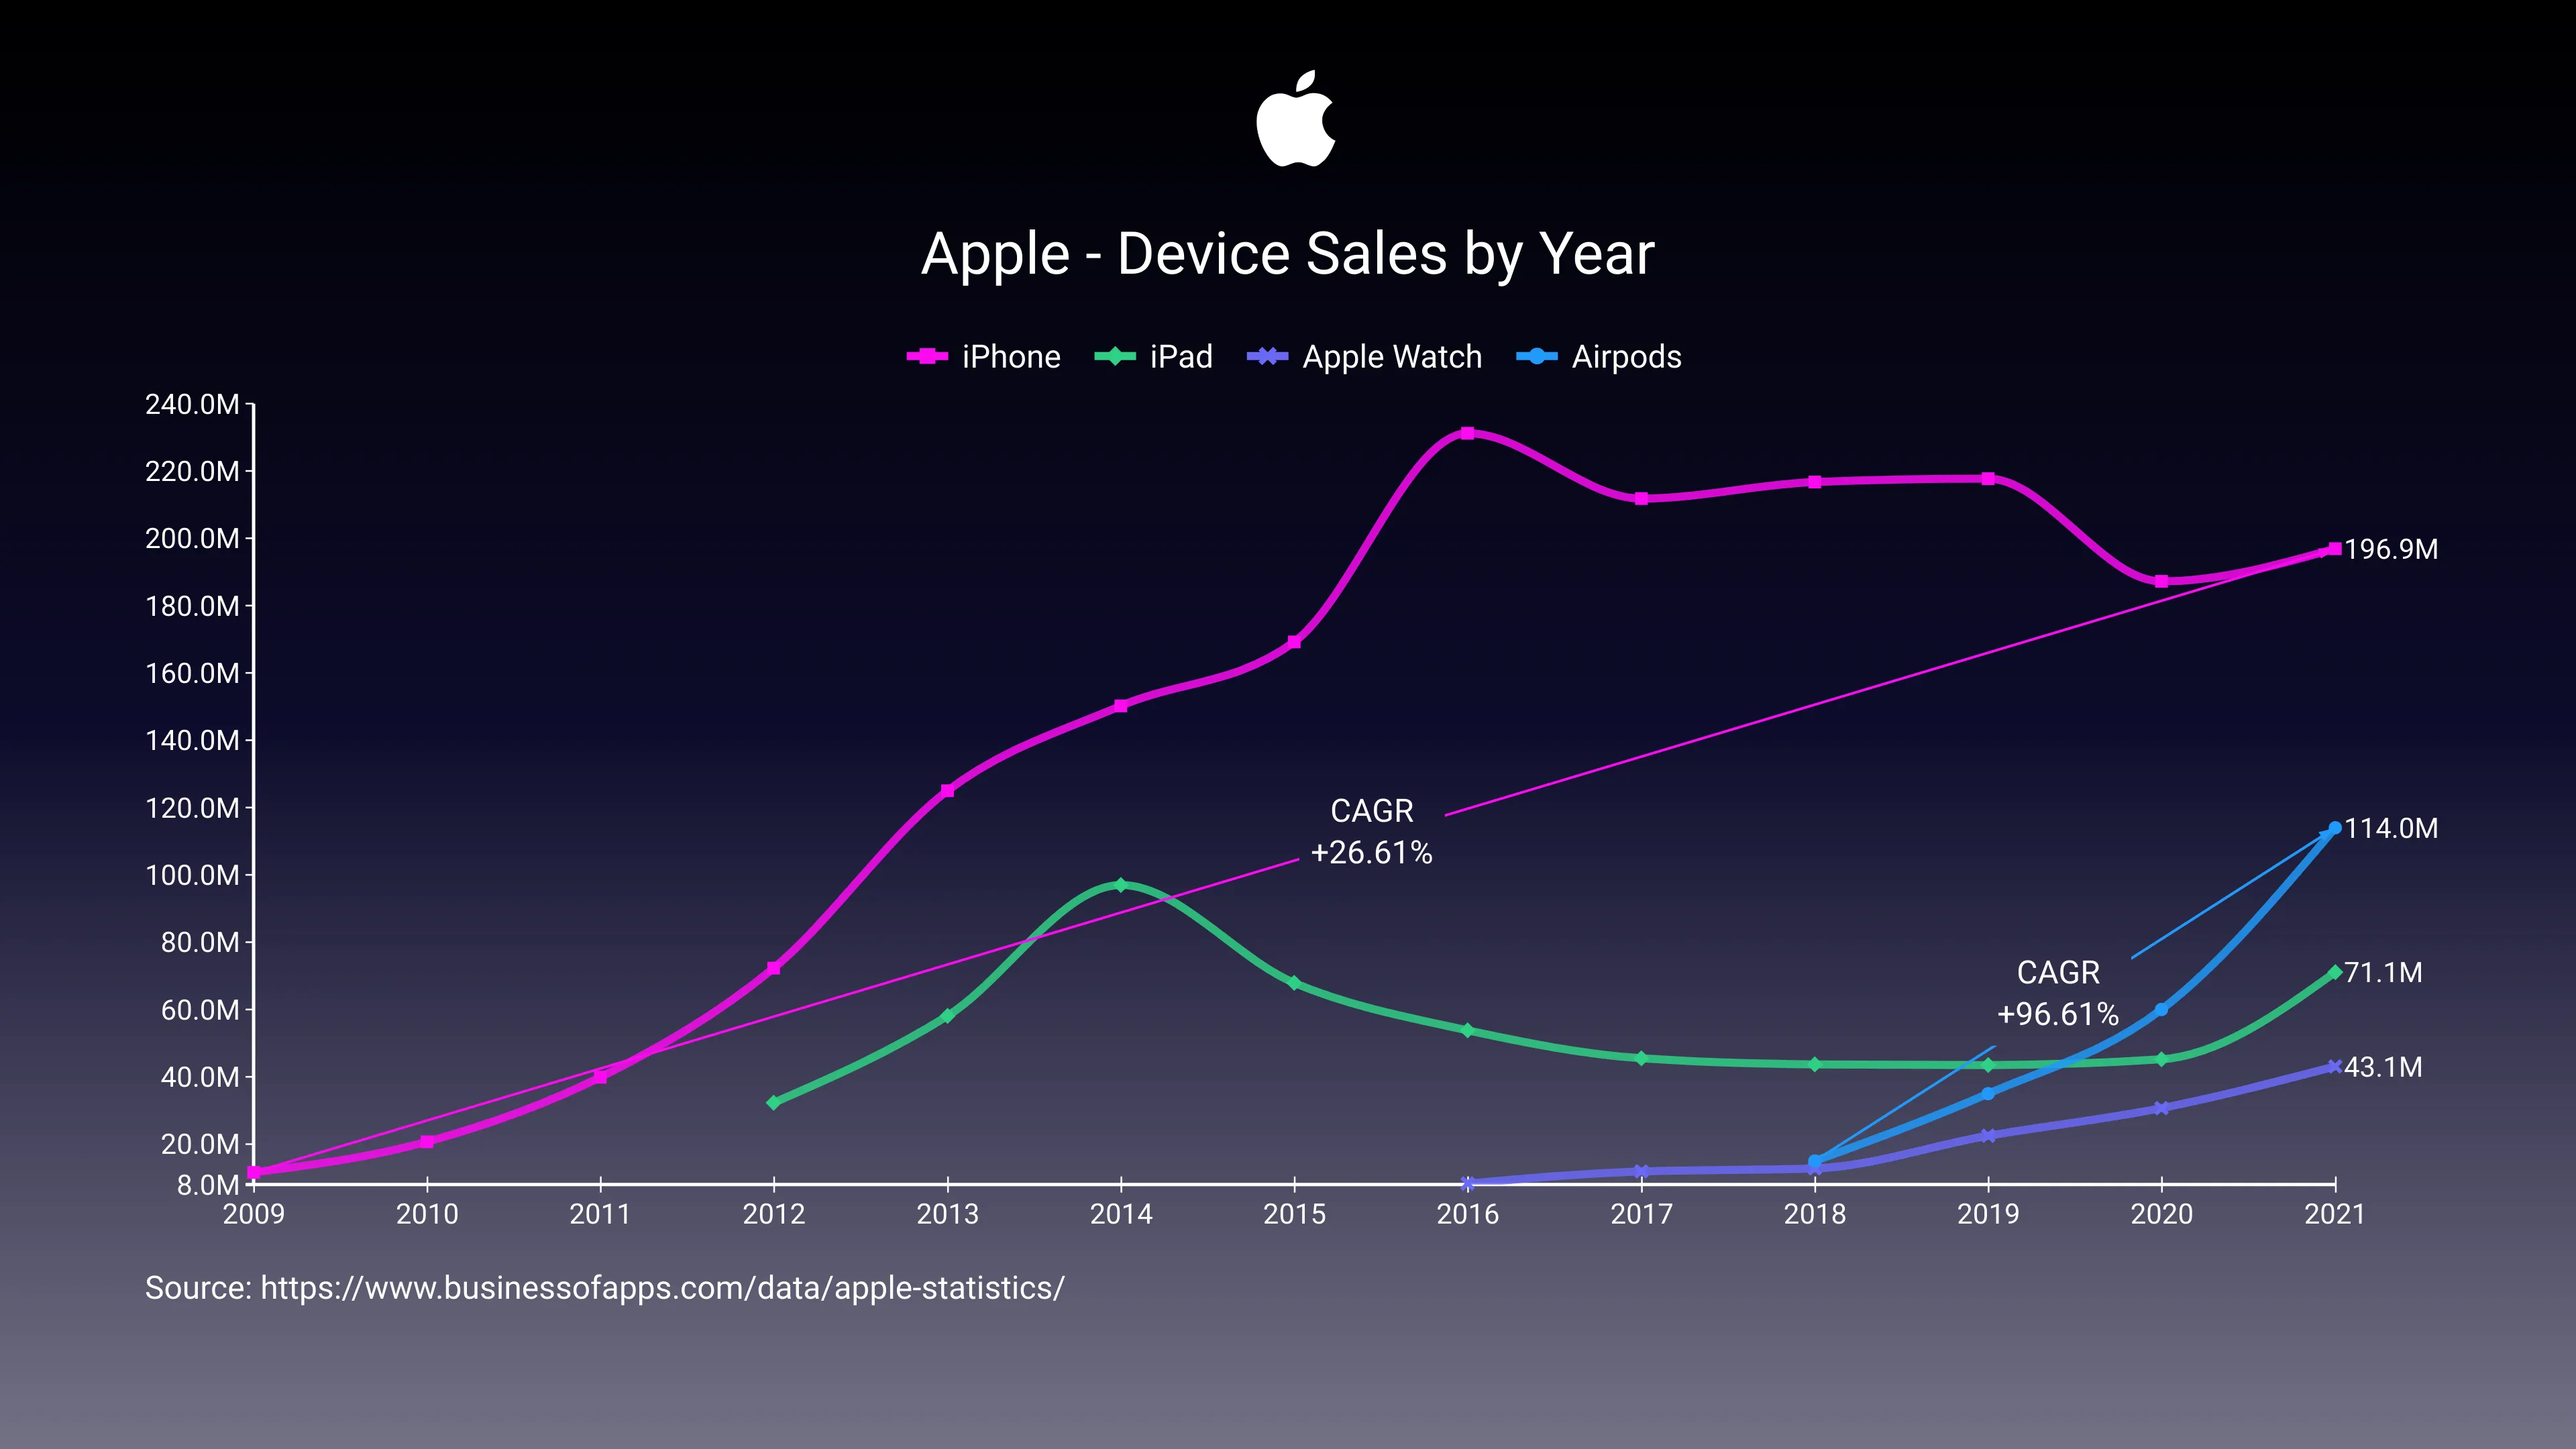 Apple - Device Sales by Year